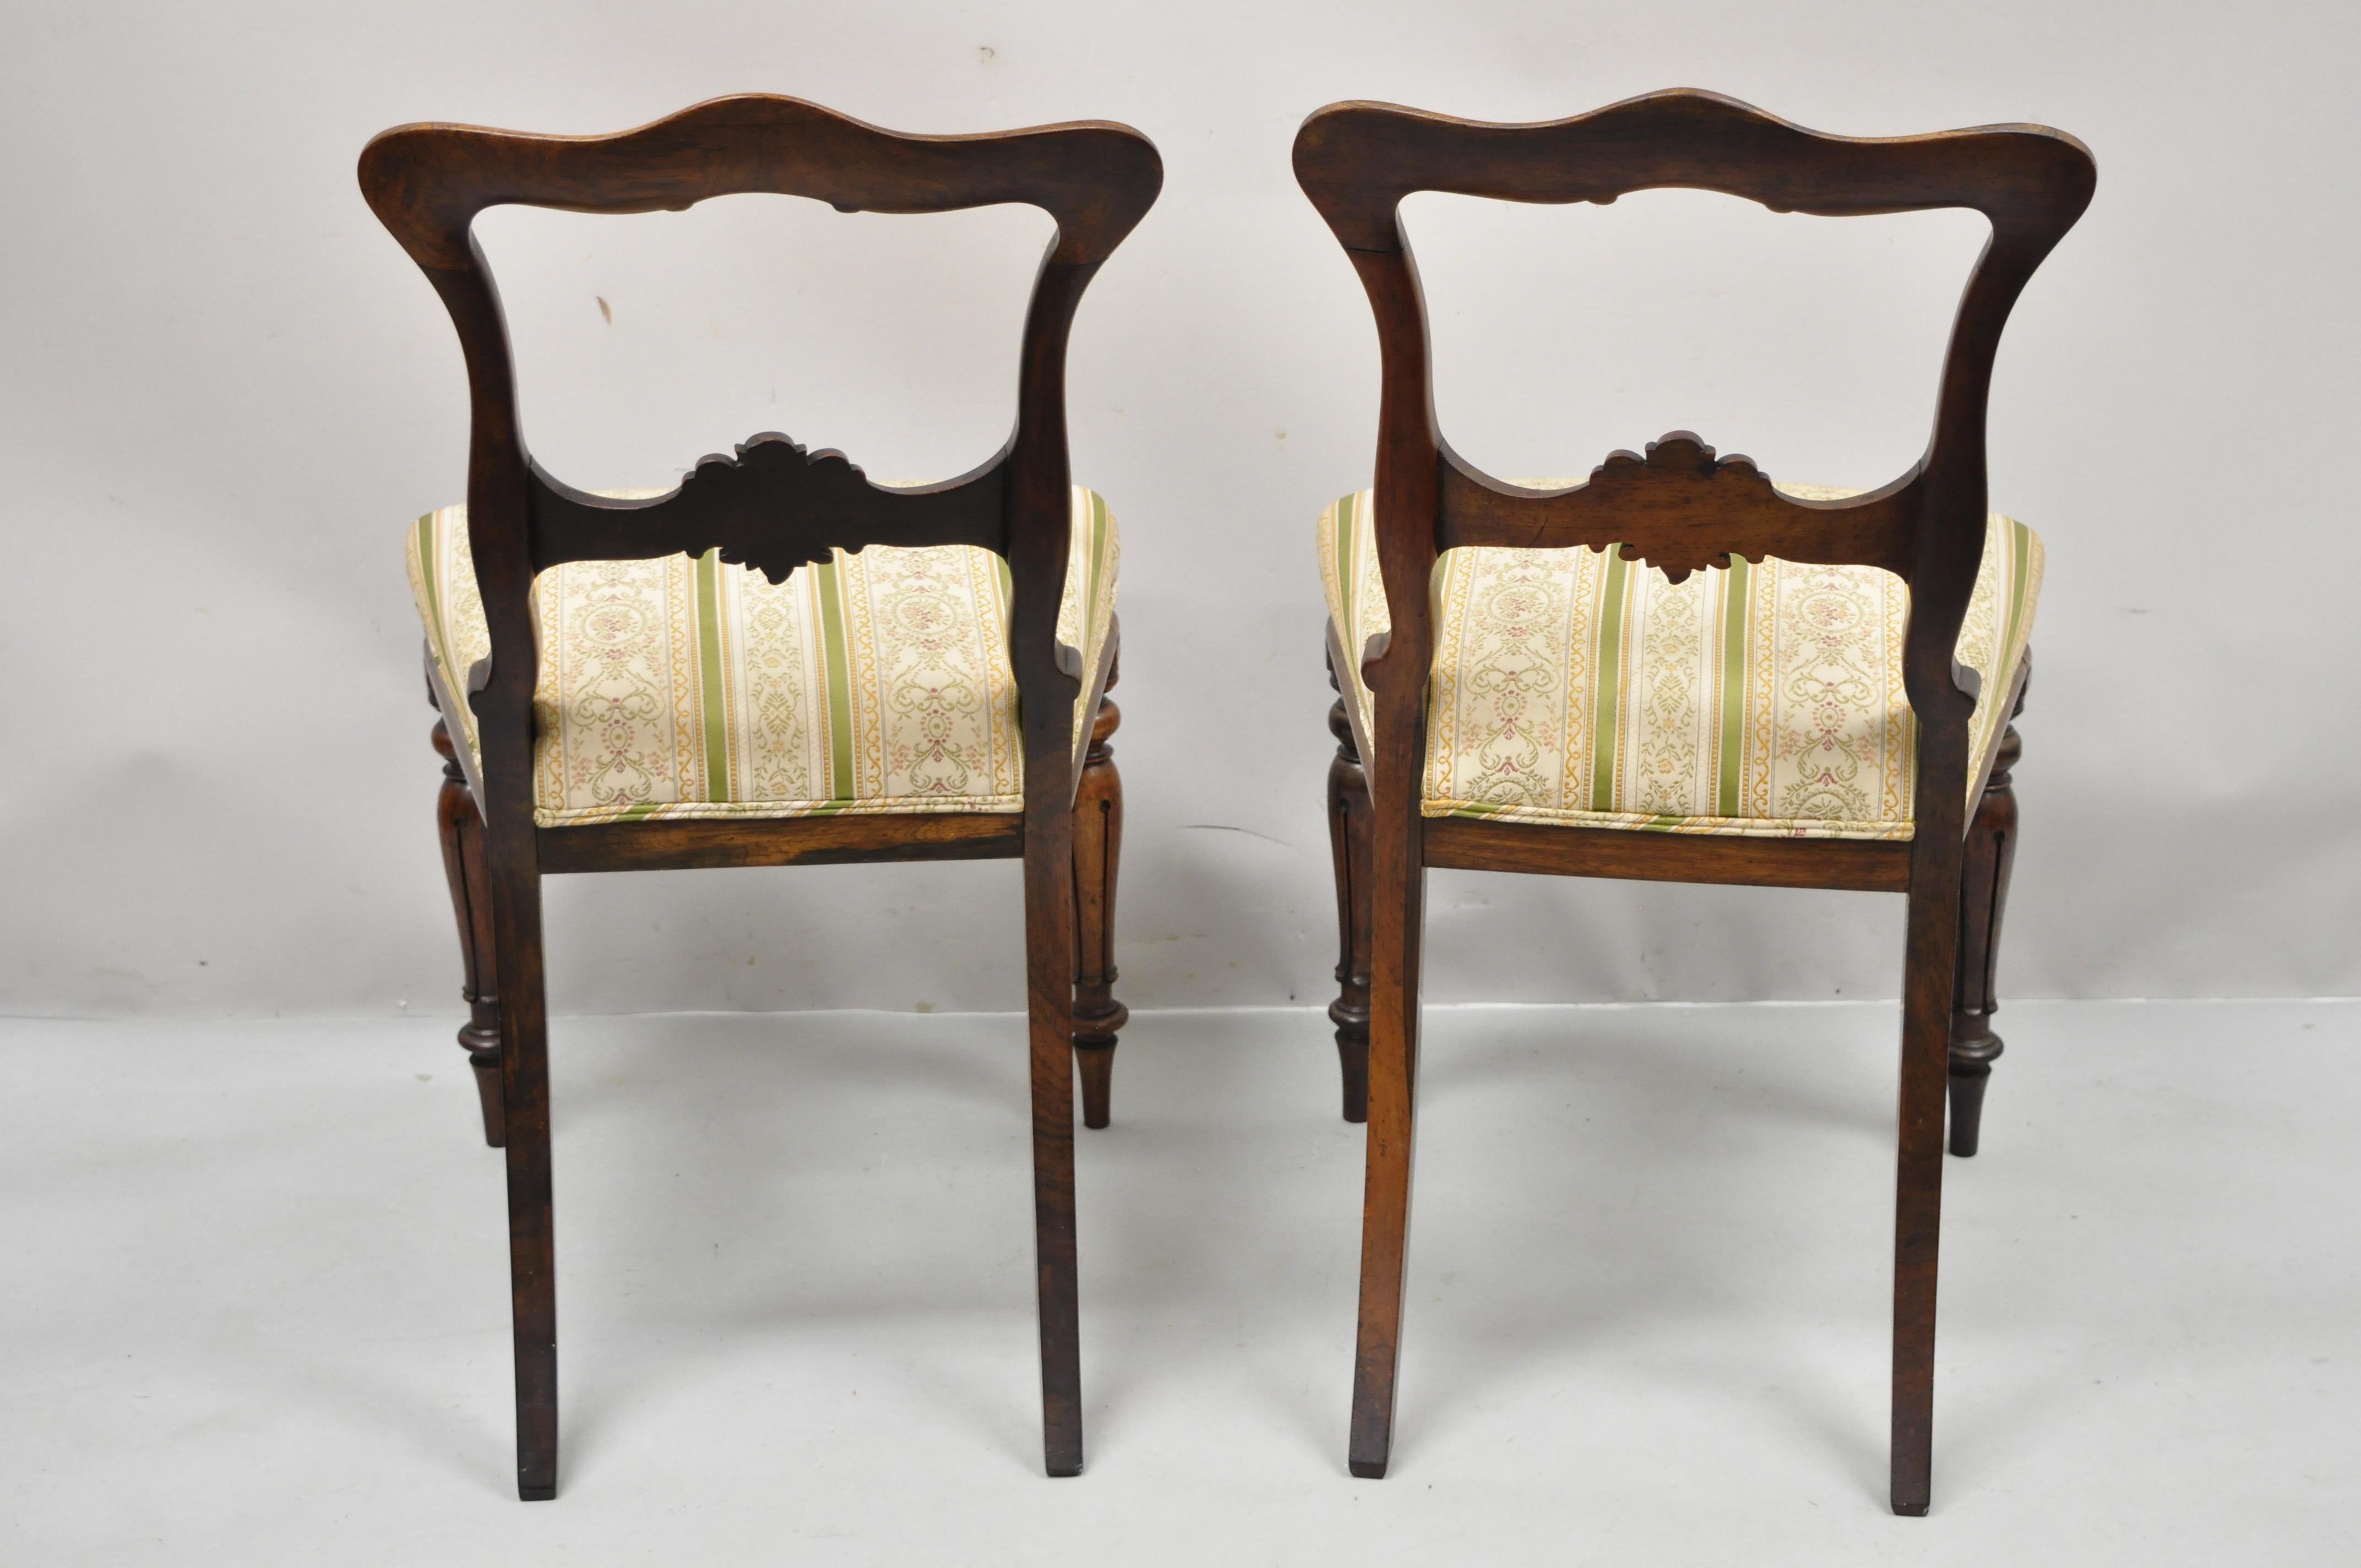 Victorian Art Nouveau Transitional Rosewood Carved Parlor Side Chairs, a Pair For Sale 4